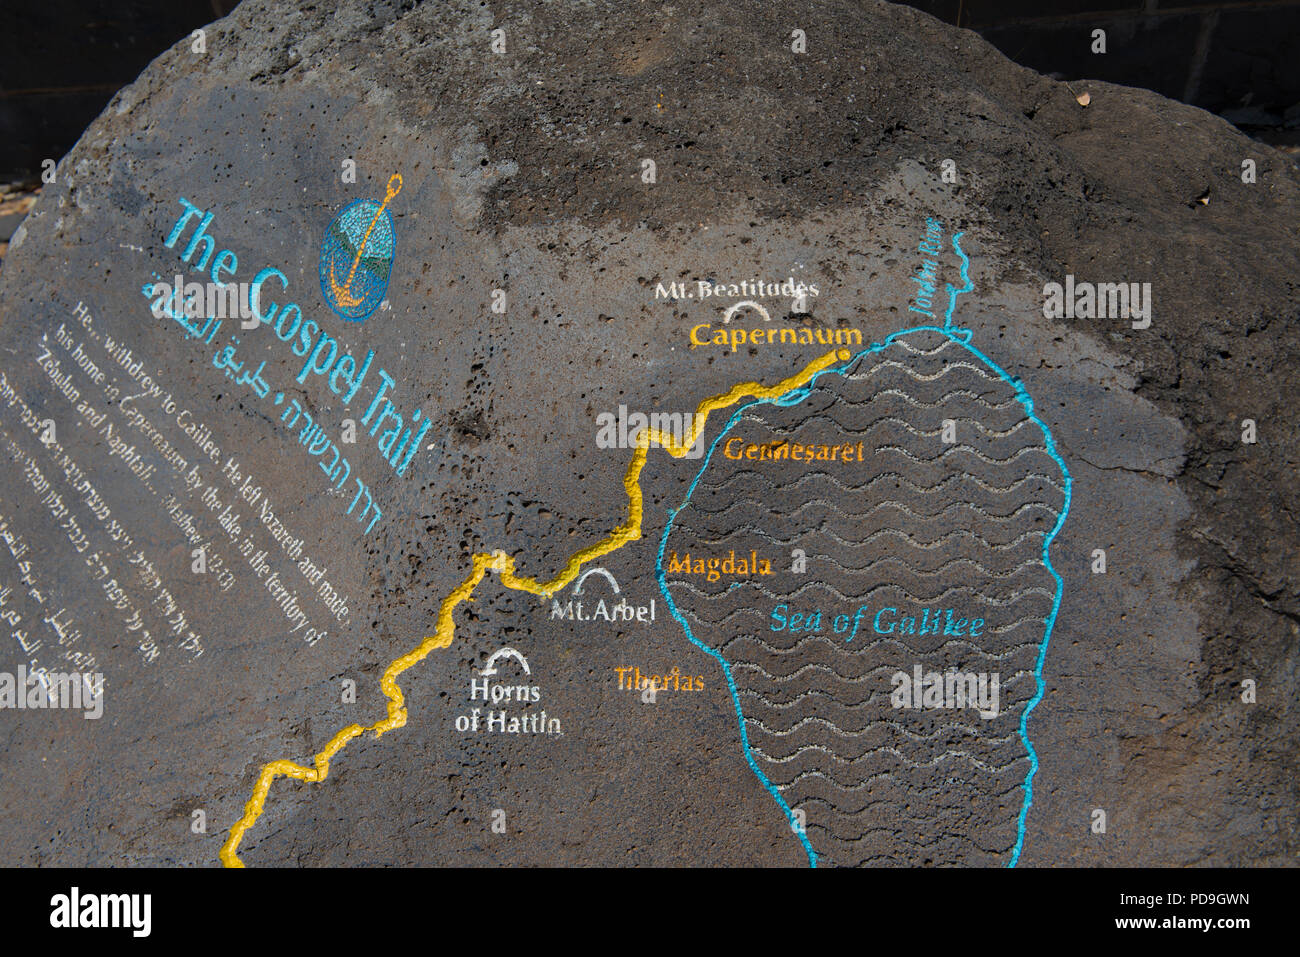 Sea of Galilee, israel  May 18  2018: Map of the Gospel trail carved and painted on a rock near the Sea of Galilee. translation on the map. Stock Photo